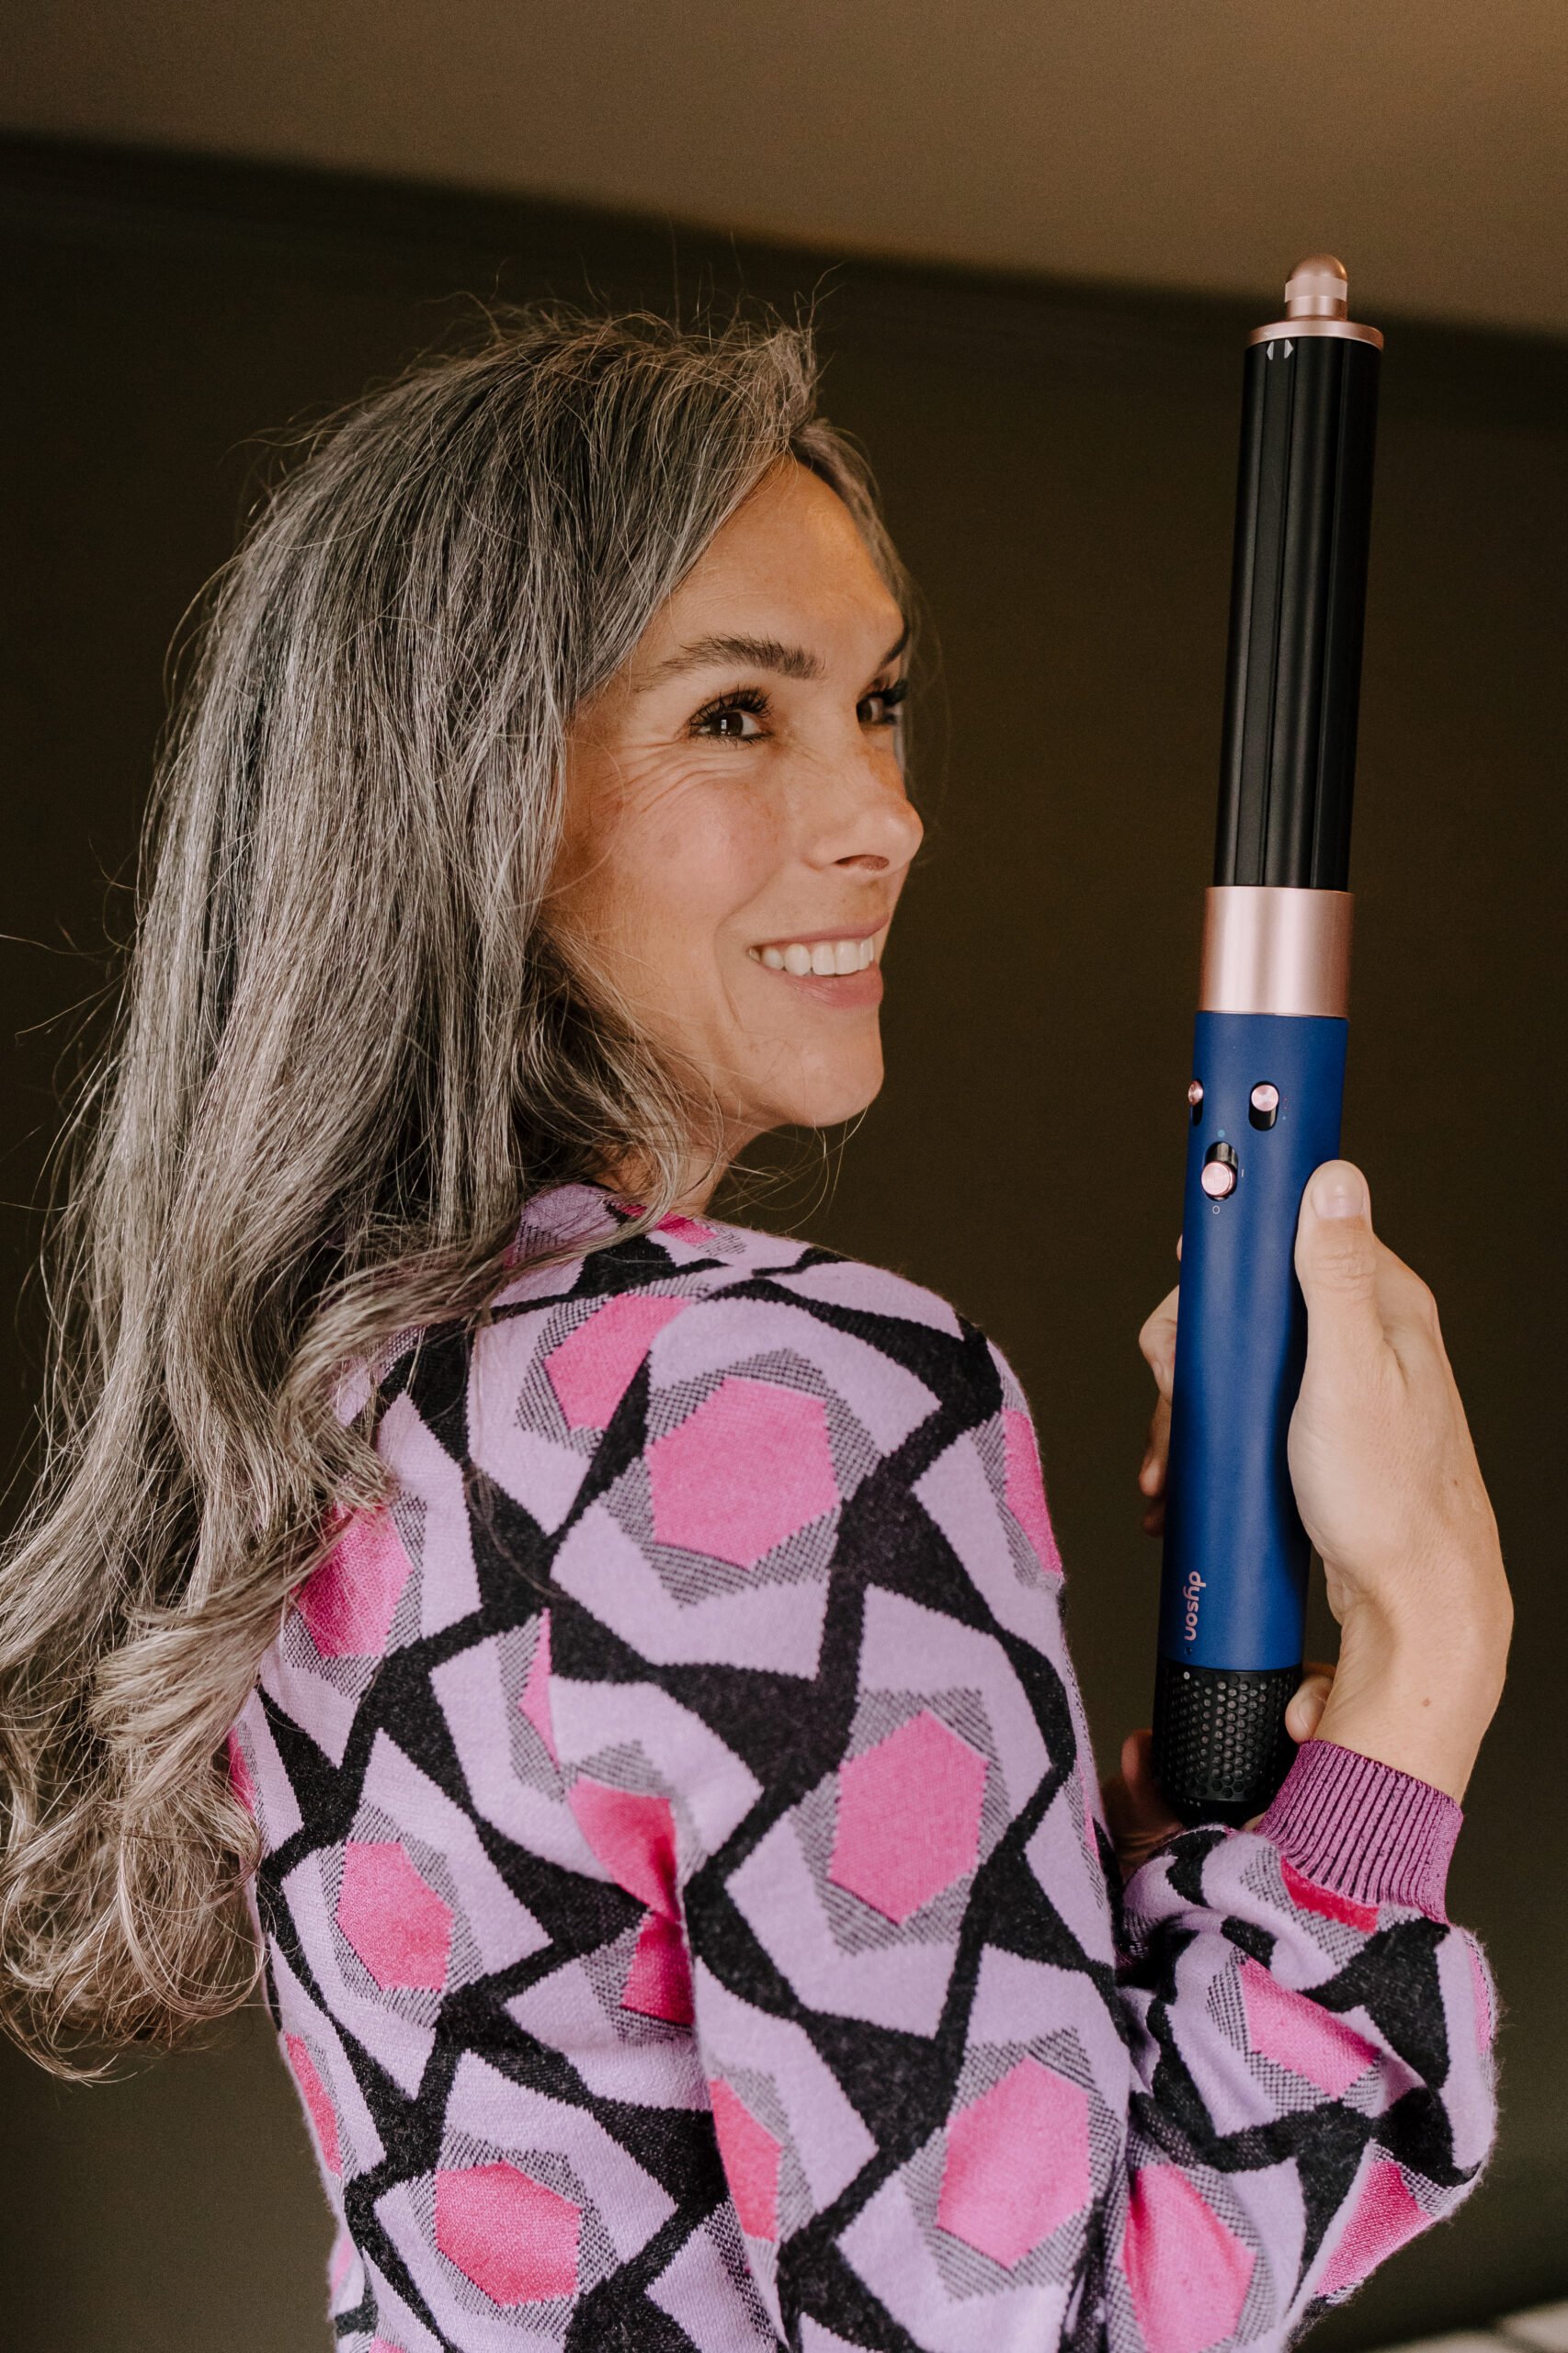 A woman with long gray hair holds up the Dyson Airwrap